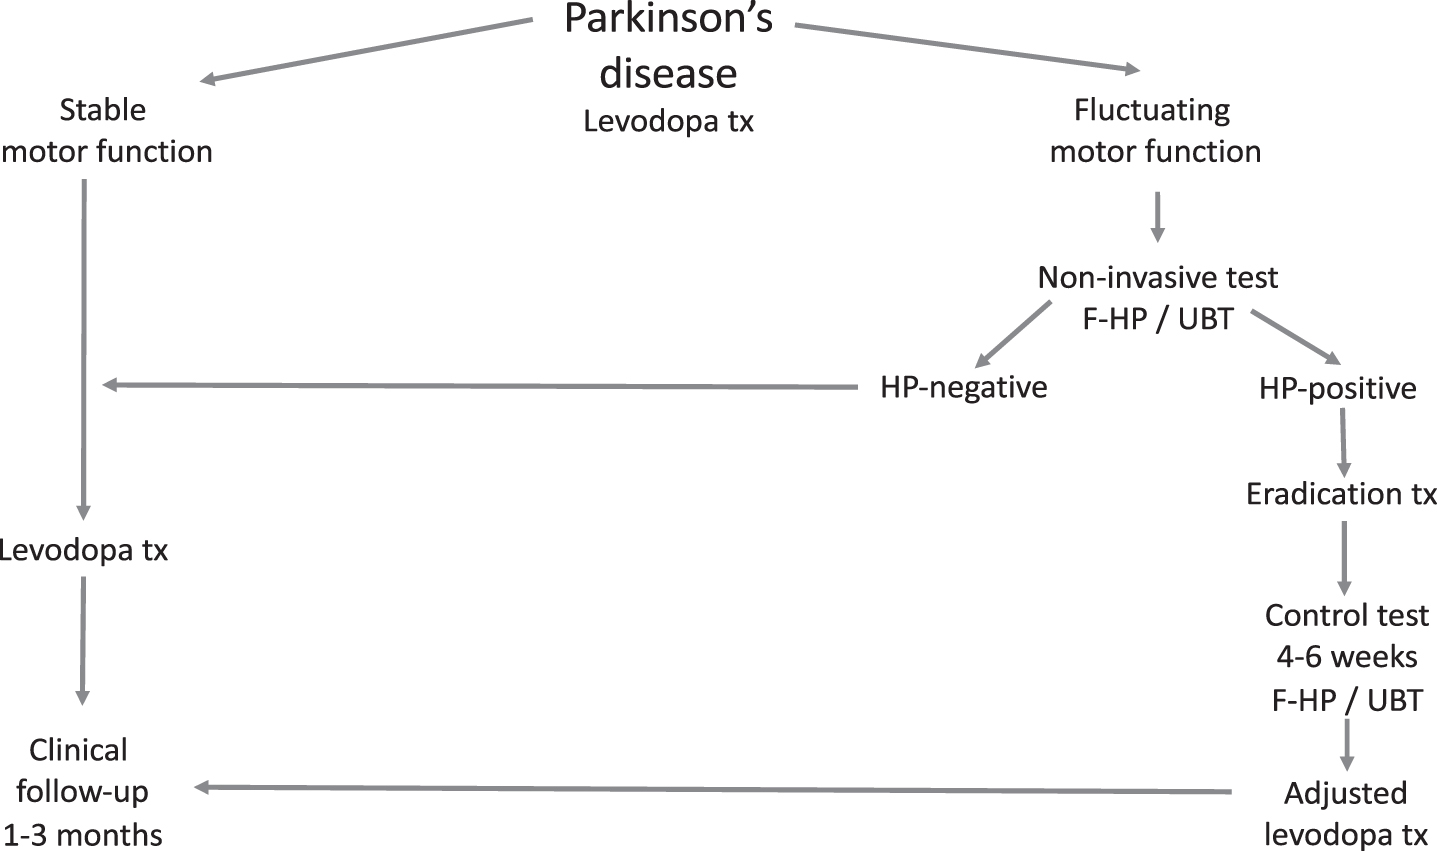 Suggested flow chart for the diagnosis, treatment (tx) and follow-up of Helicobacter pylori (HP) infection in Parkinson’s disease. F-HP, fecal Helicobacter pylori antigen analysis; UBT, urea breath test.